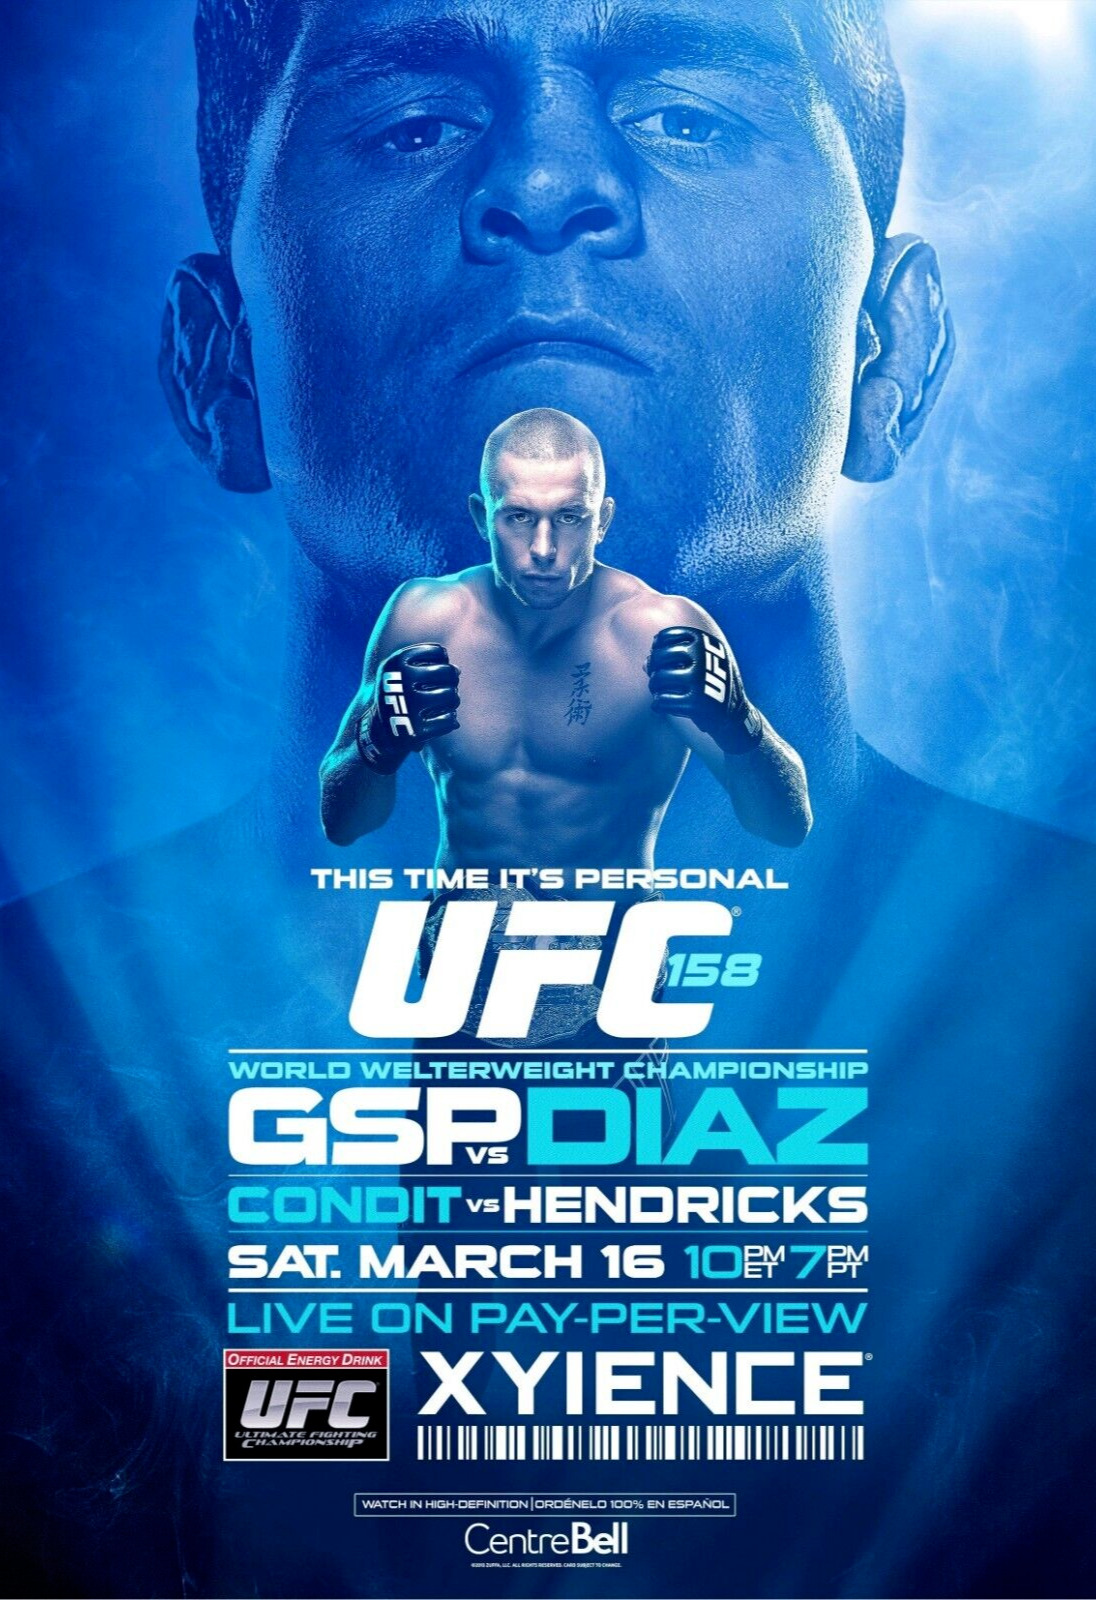 UFC 158 Fight Poster 11x17 Inches - Georges St-Pierre vs Nick Diaz | GSP NEW